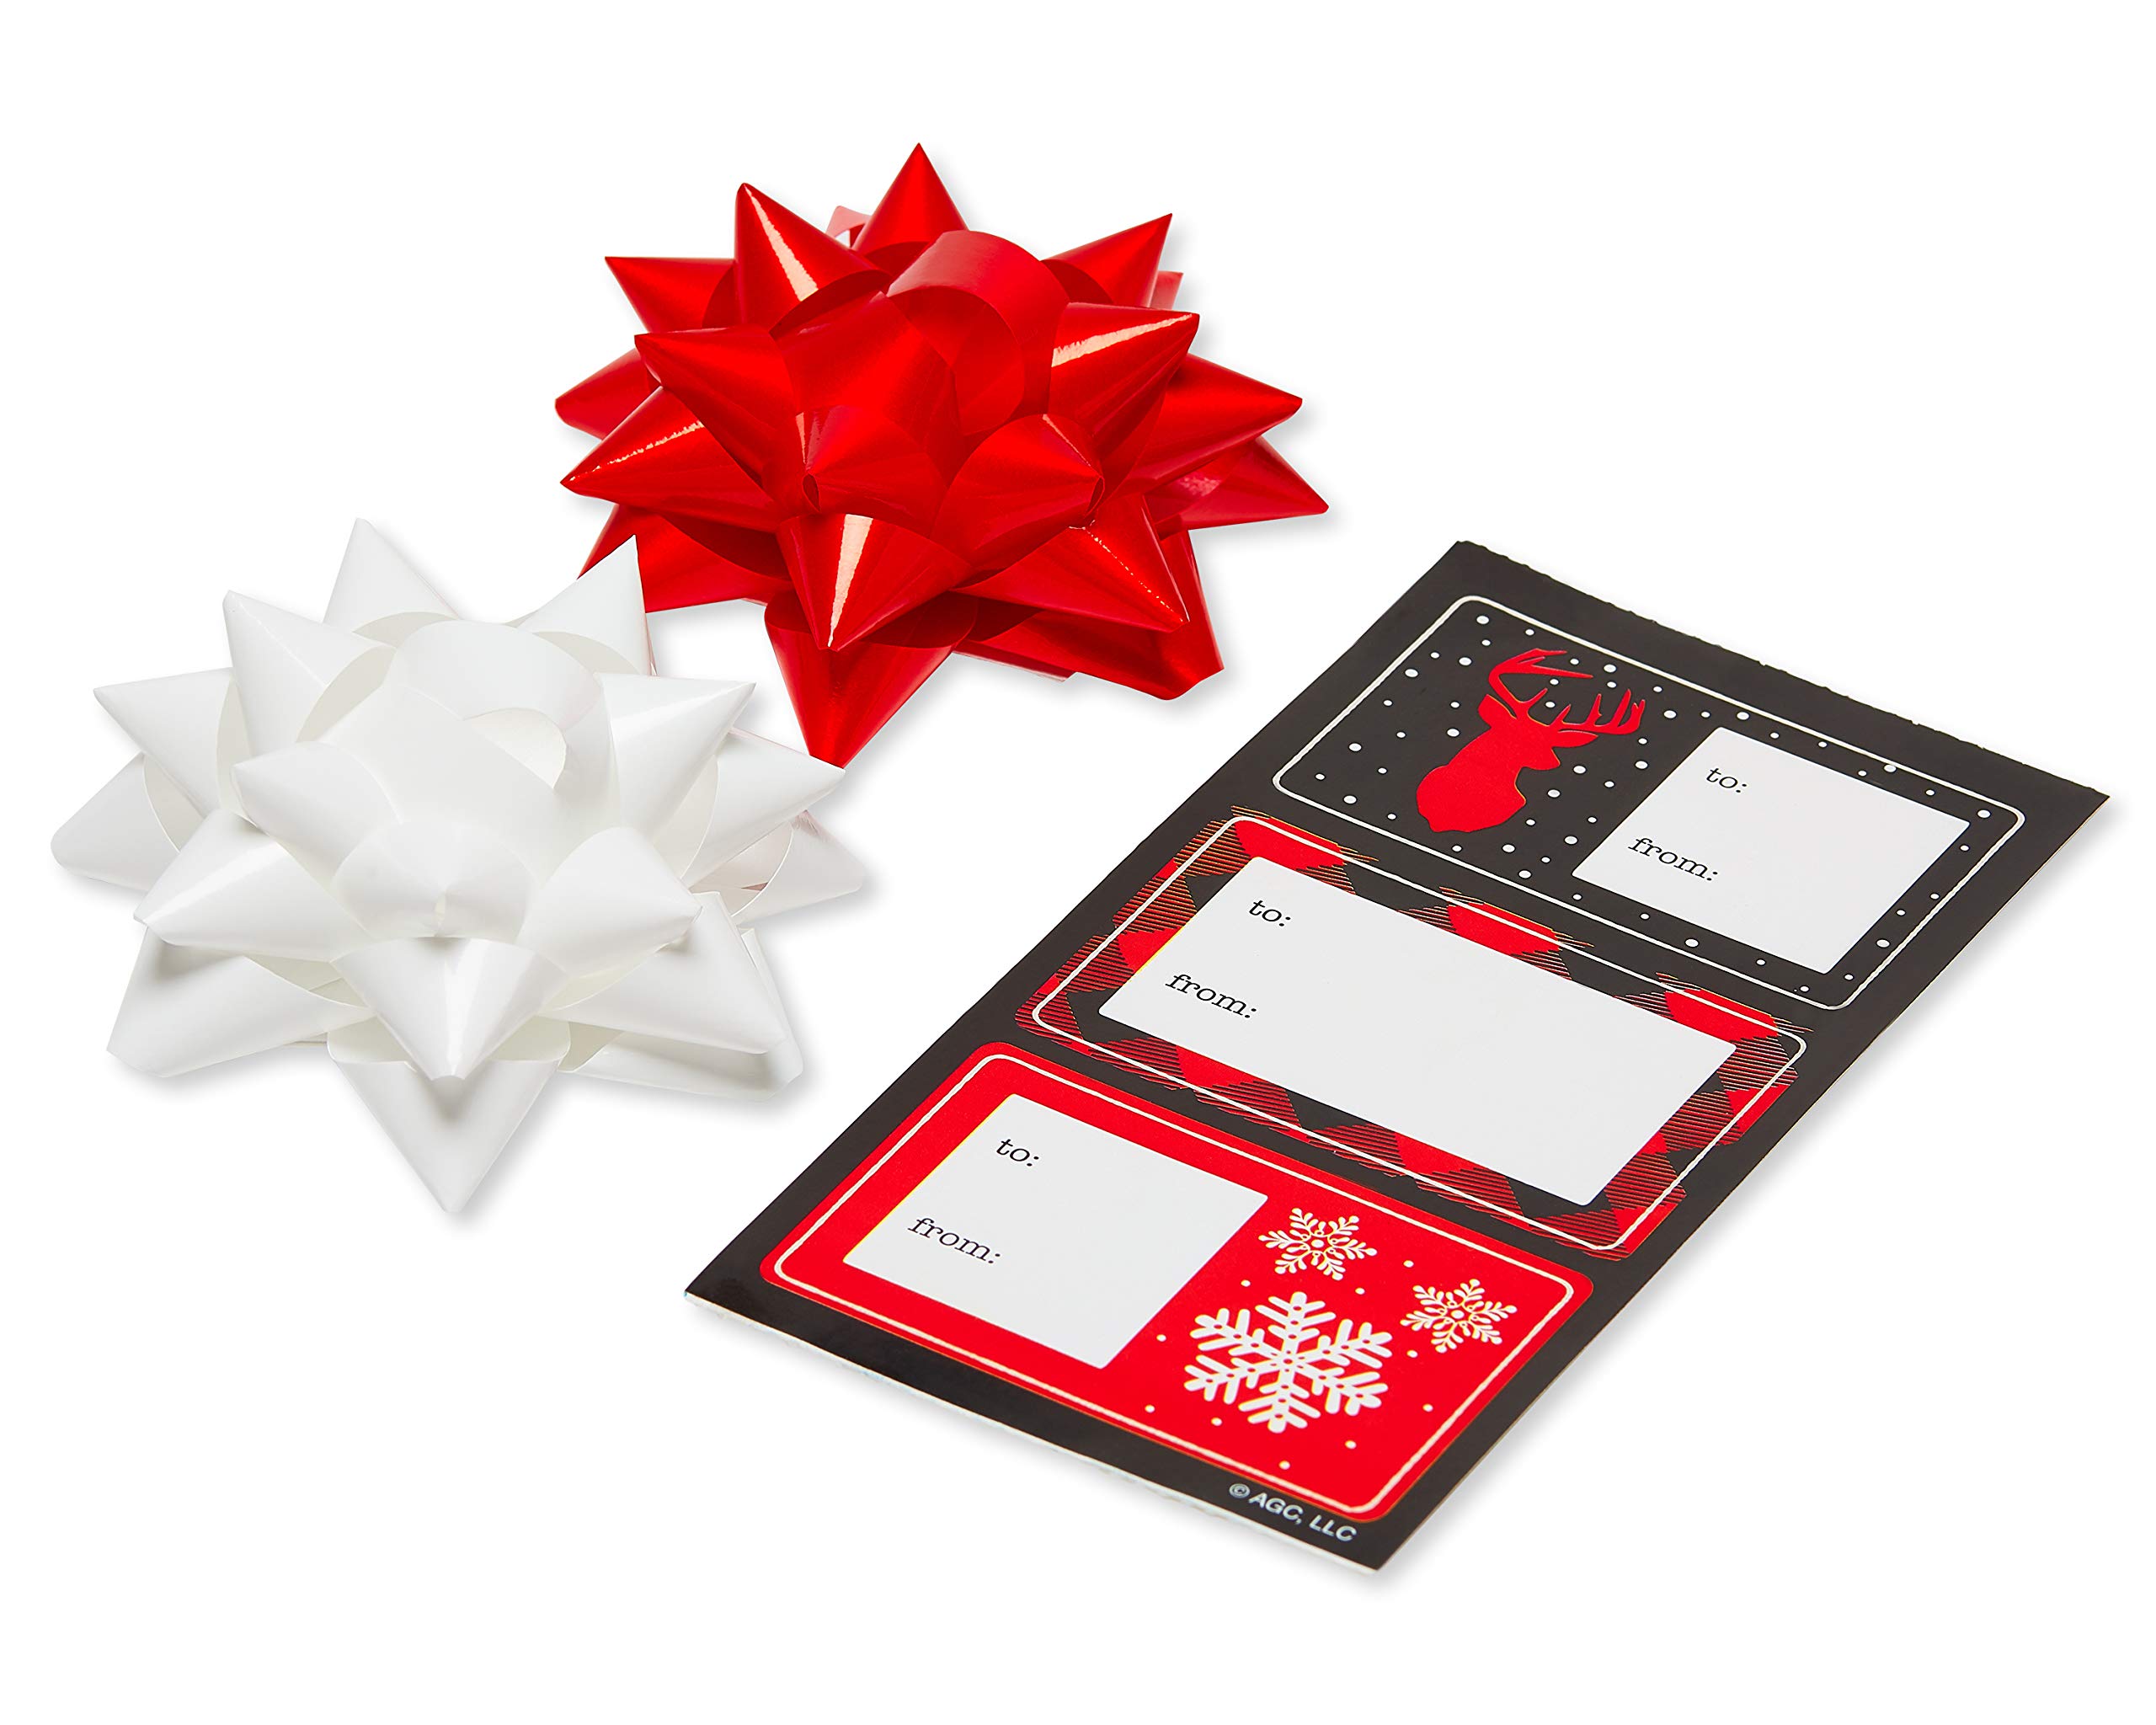 American Greetings Christmas Wrapping Paper Set with Cut Lines, Red, Black and White, Plaid, Reindeer and Snowflakes (4 Rolls, 7 Bows, 30 Gift Tags, 120 sq. ft.)